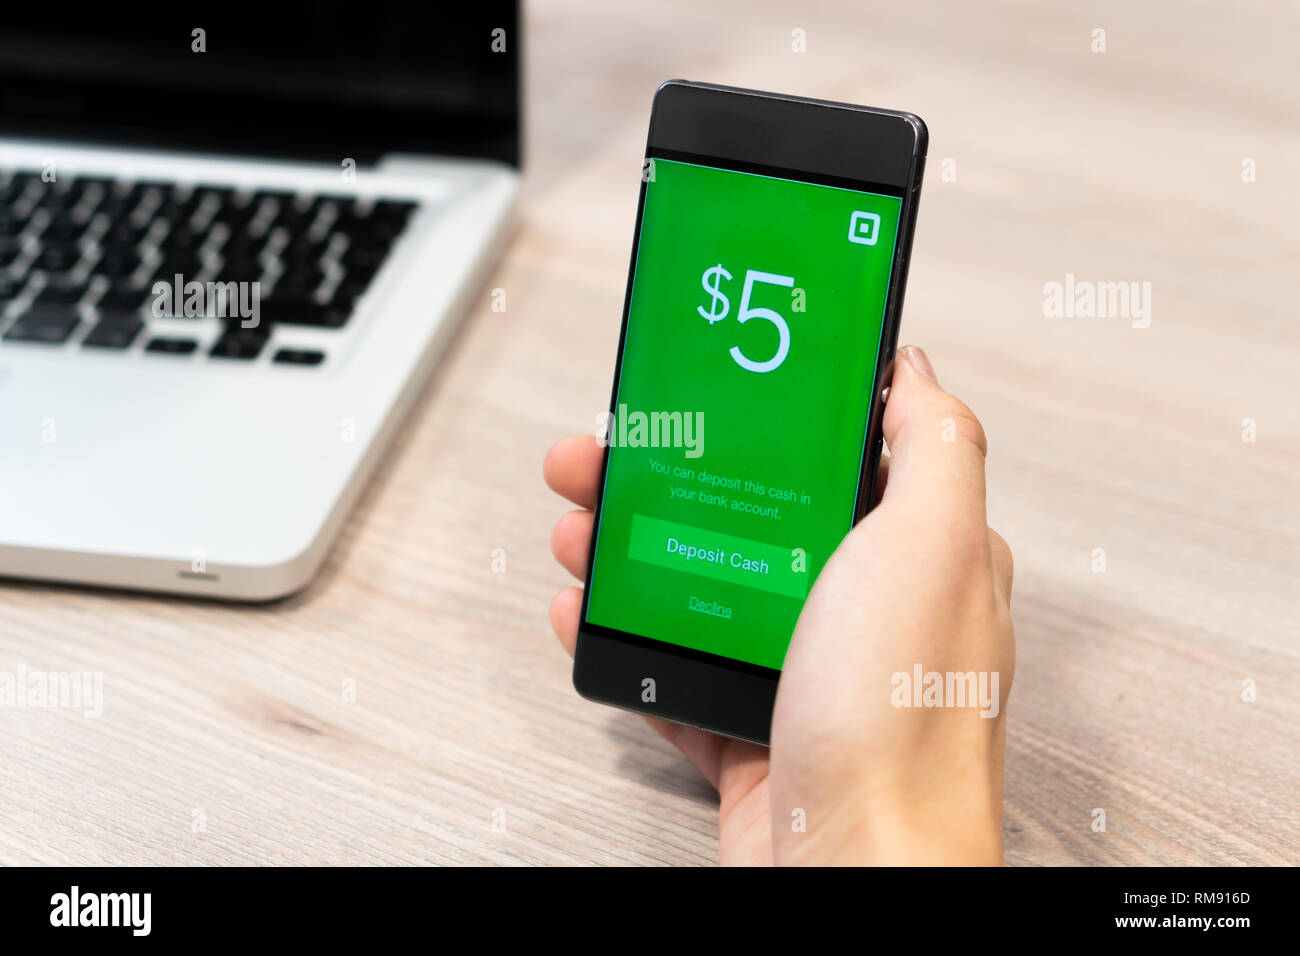 Cash App by Square inc displayed on smartphone held by human hand next to computer laptop - Slovenia 13.02.2019 Stock Photo